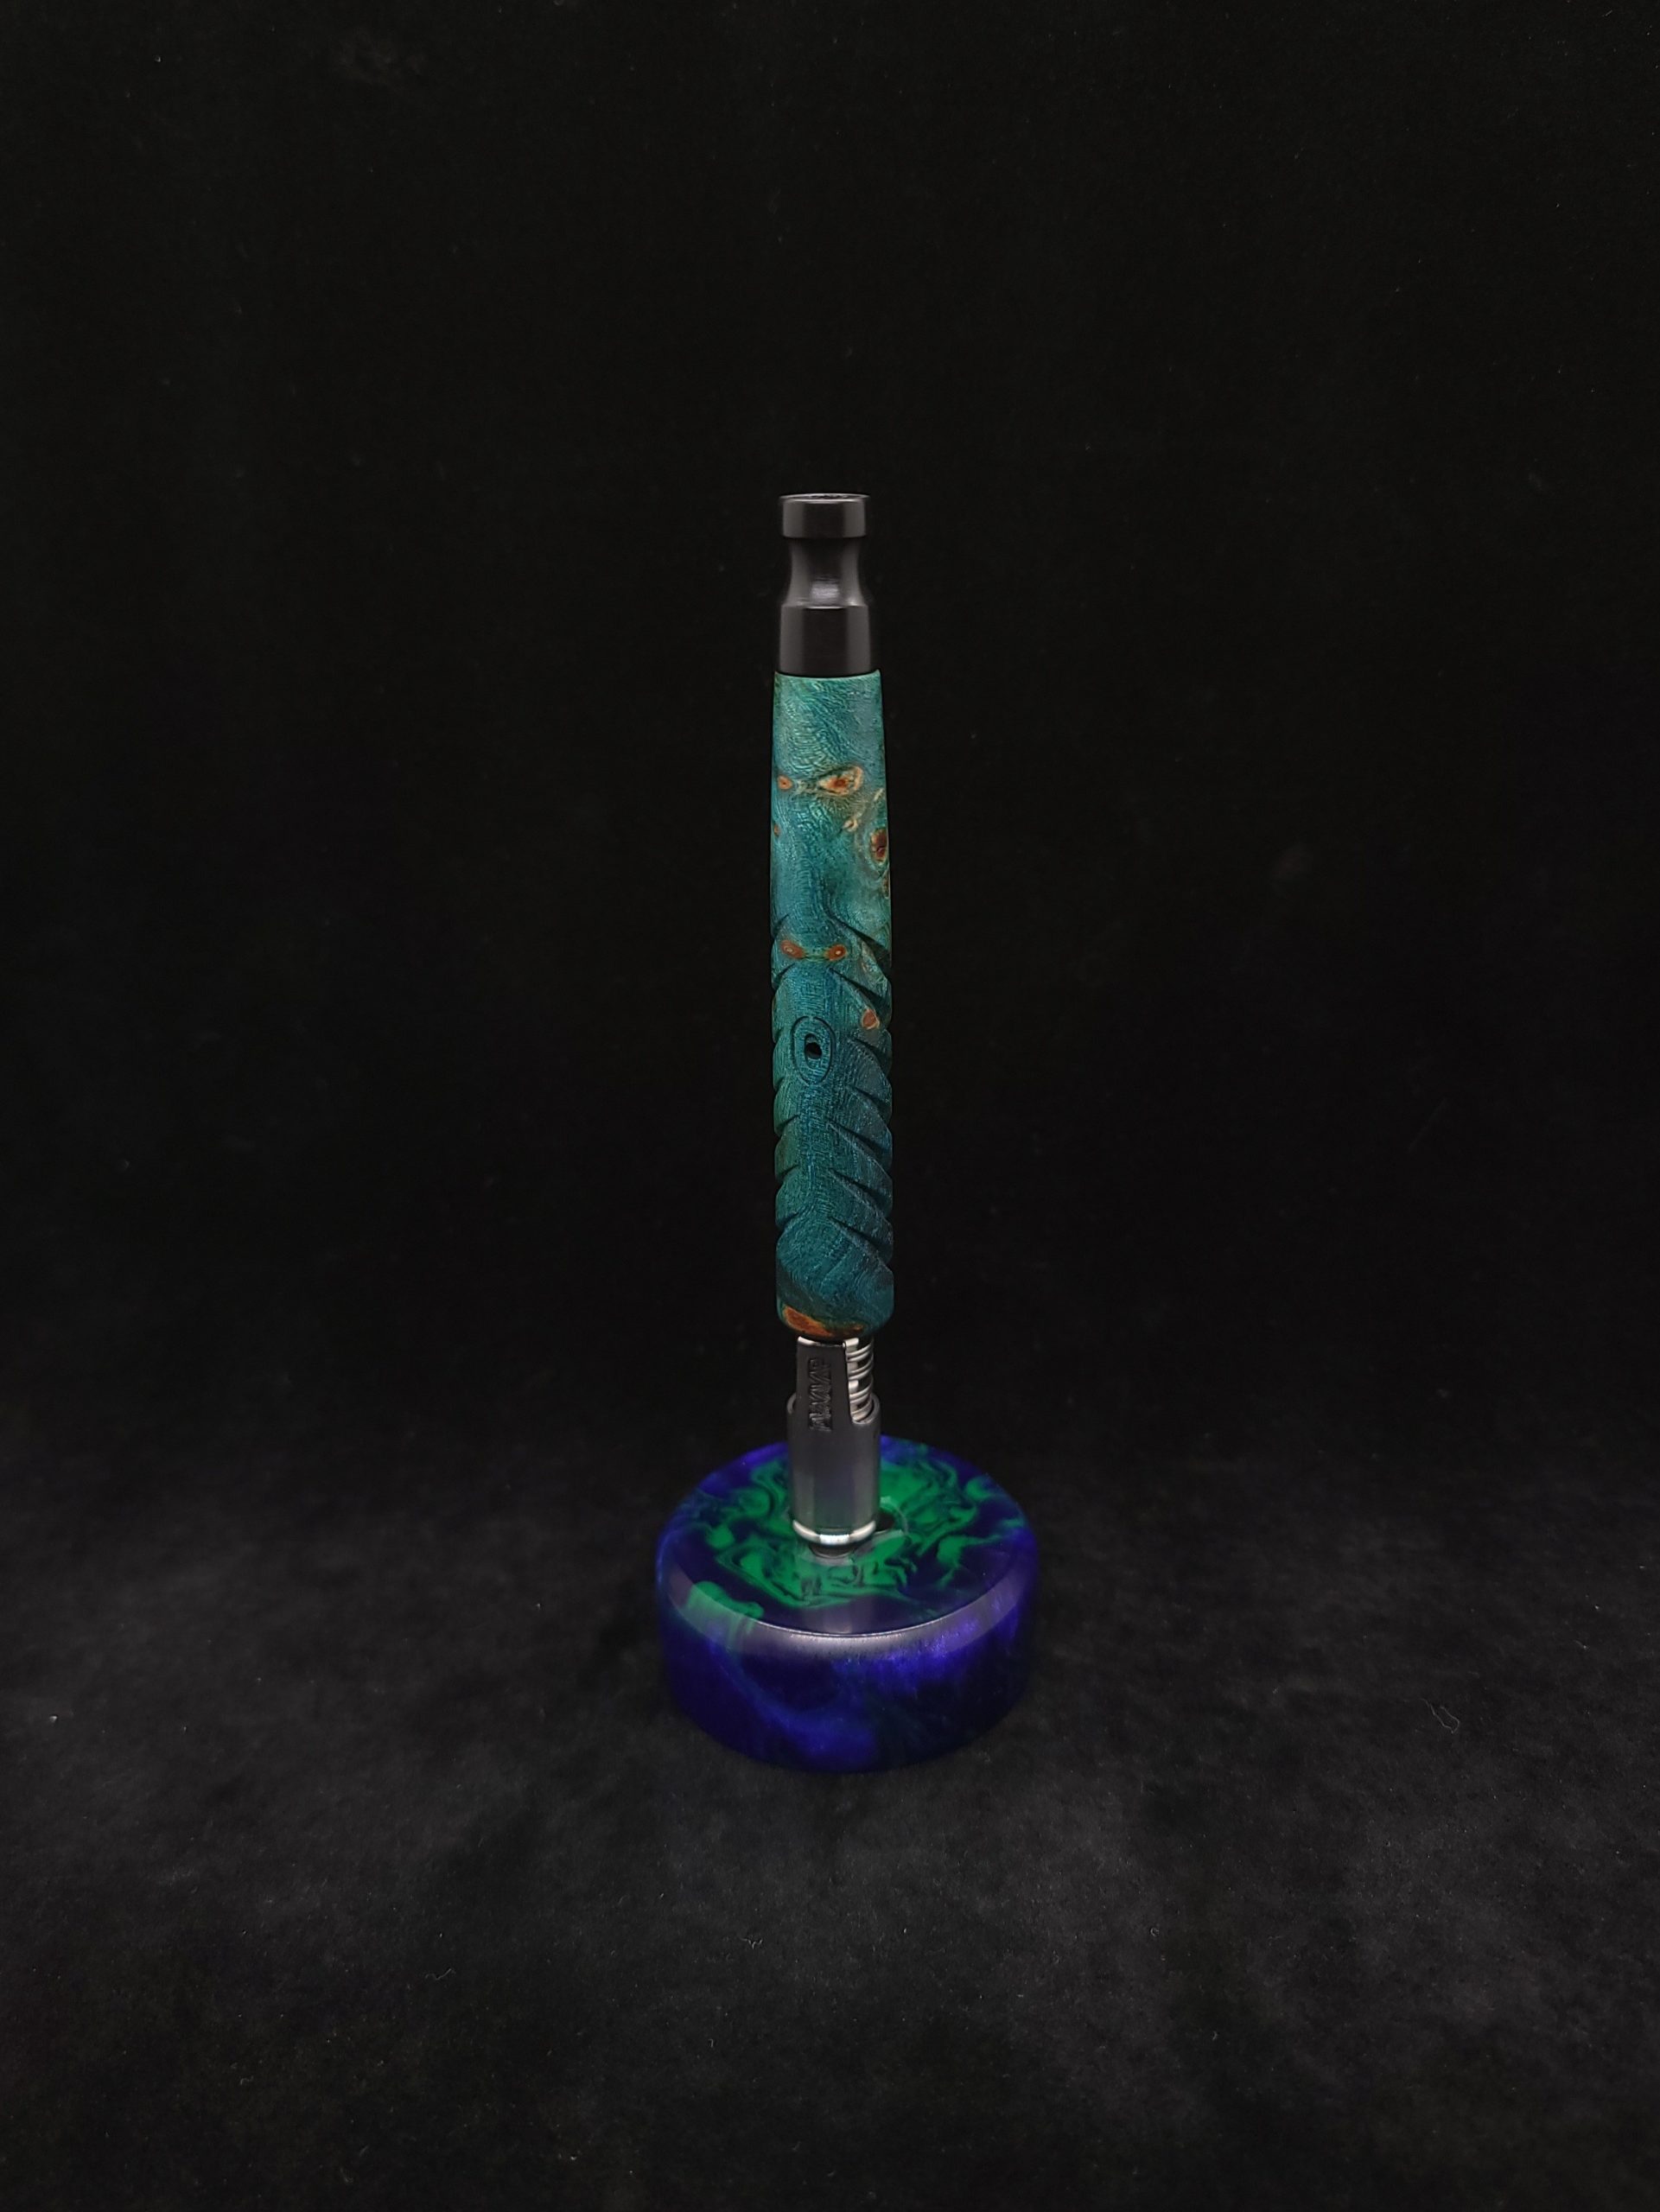 This image portrays Reaper XL Dynavap Stem/Burl Wood+Black Mouthpiece by Dovetail Woodwork.